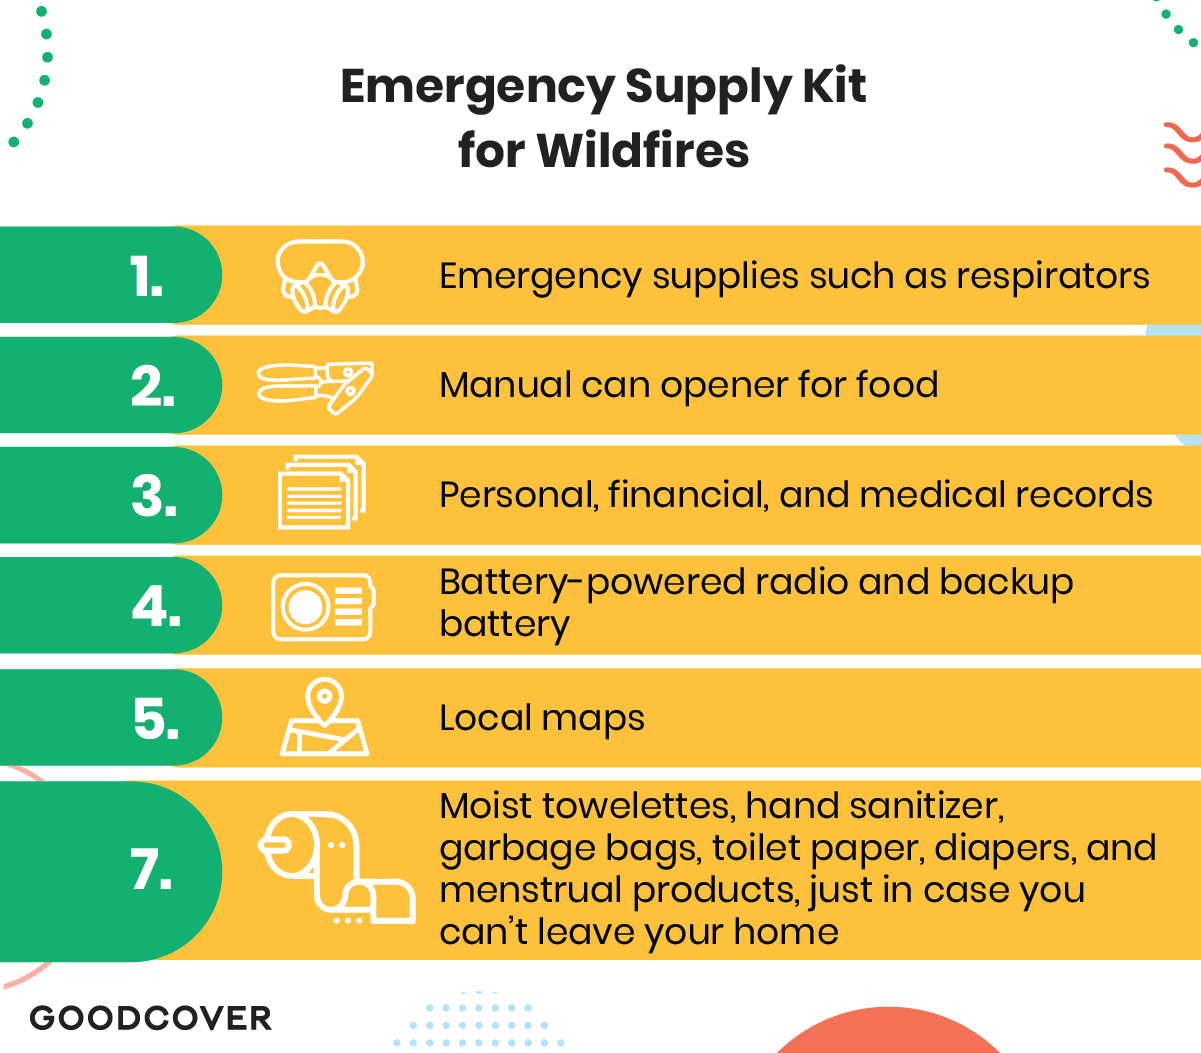 Emergency supply kit for wildfires.